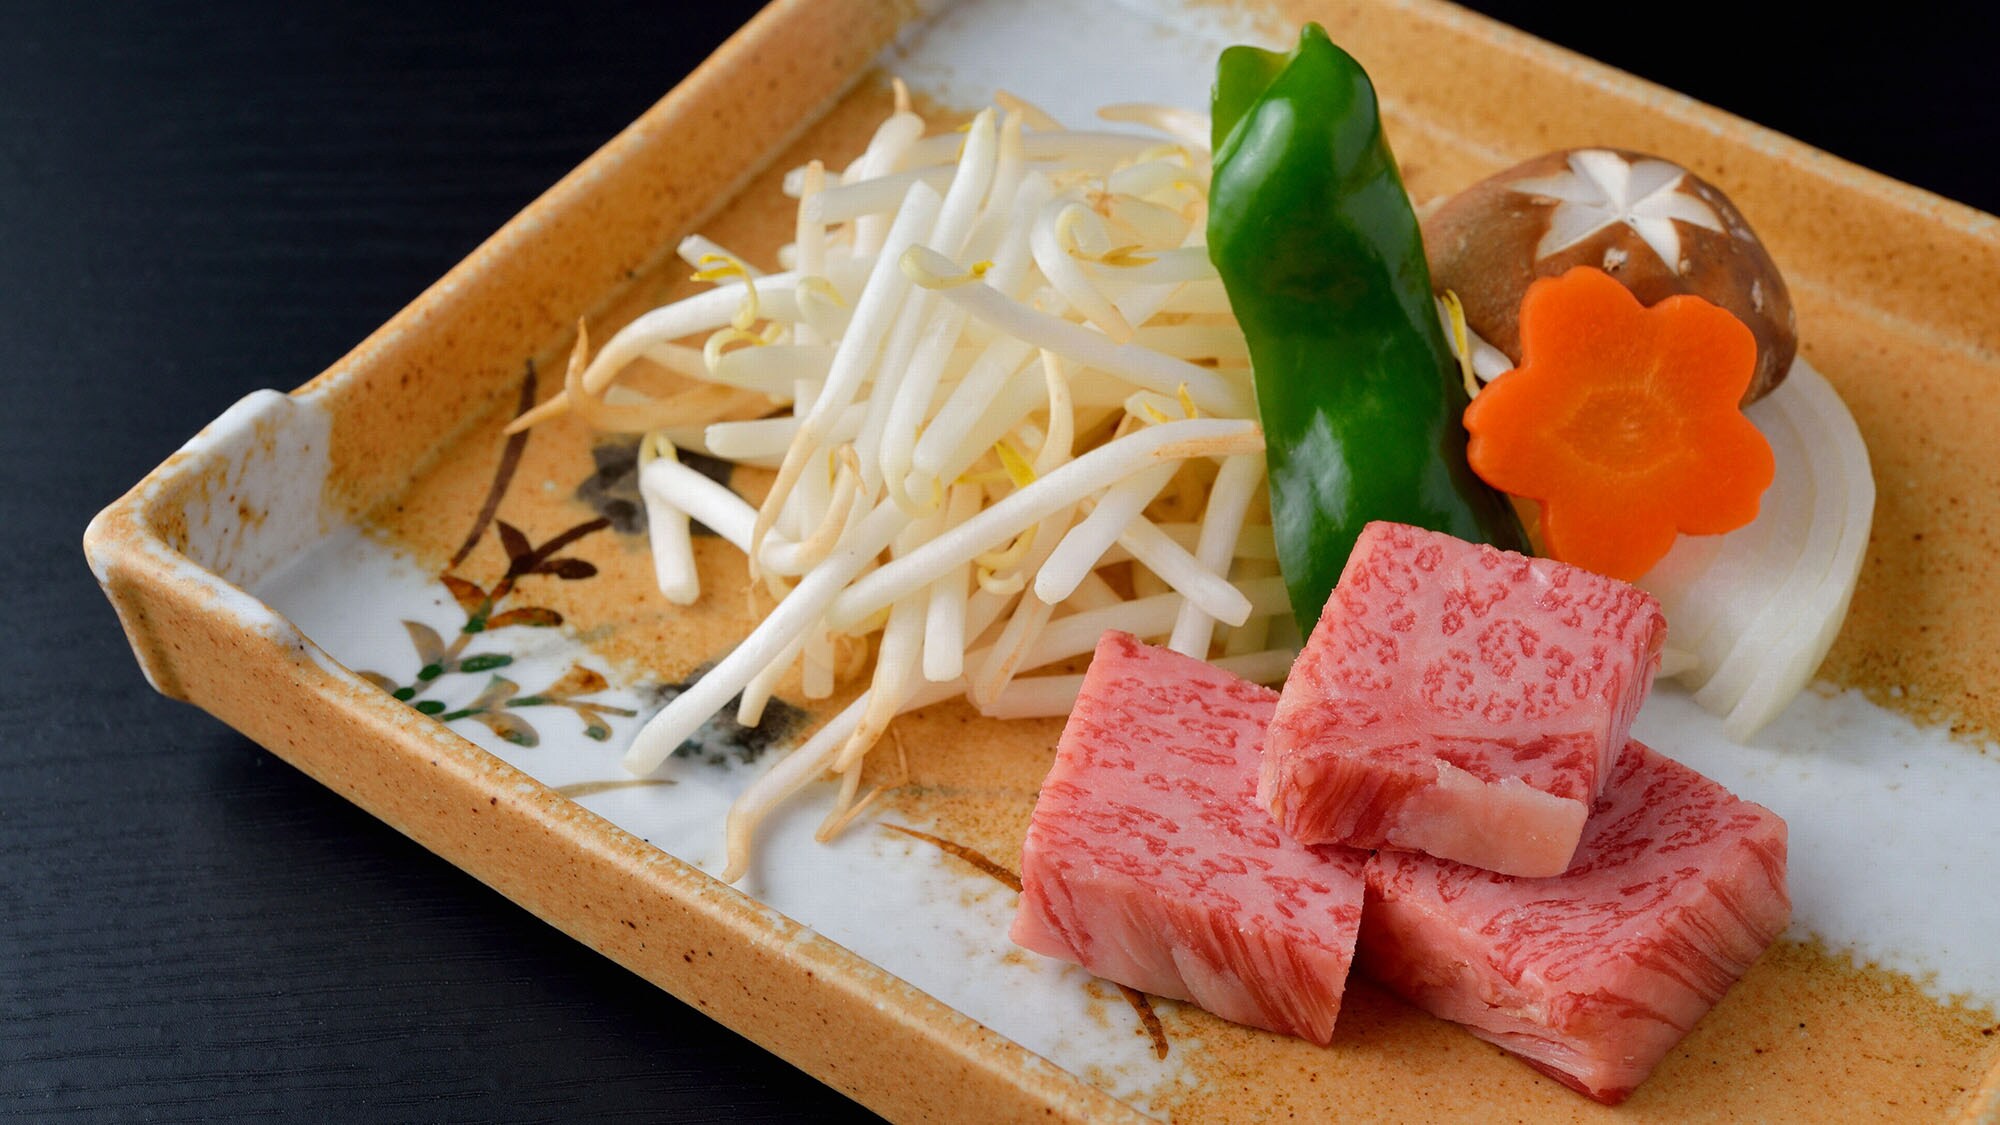 ・ Matsusaka beef is the highest brand of domestic beef that Mie Prefecture is proud of.